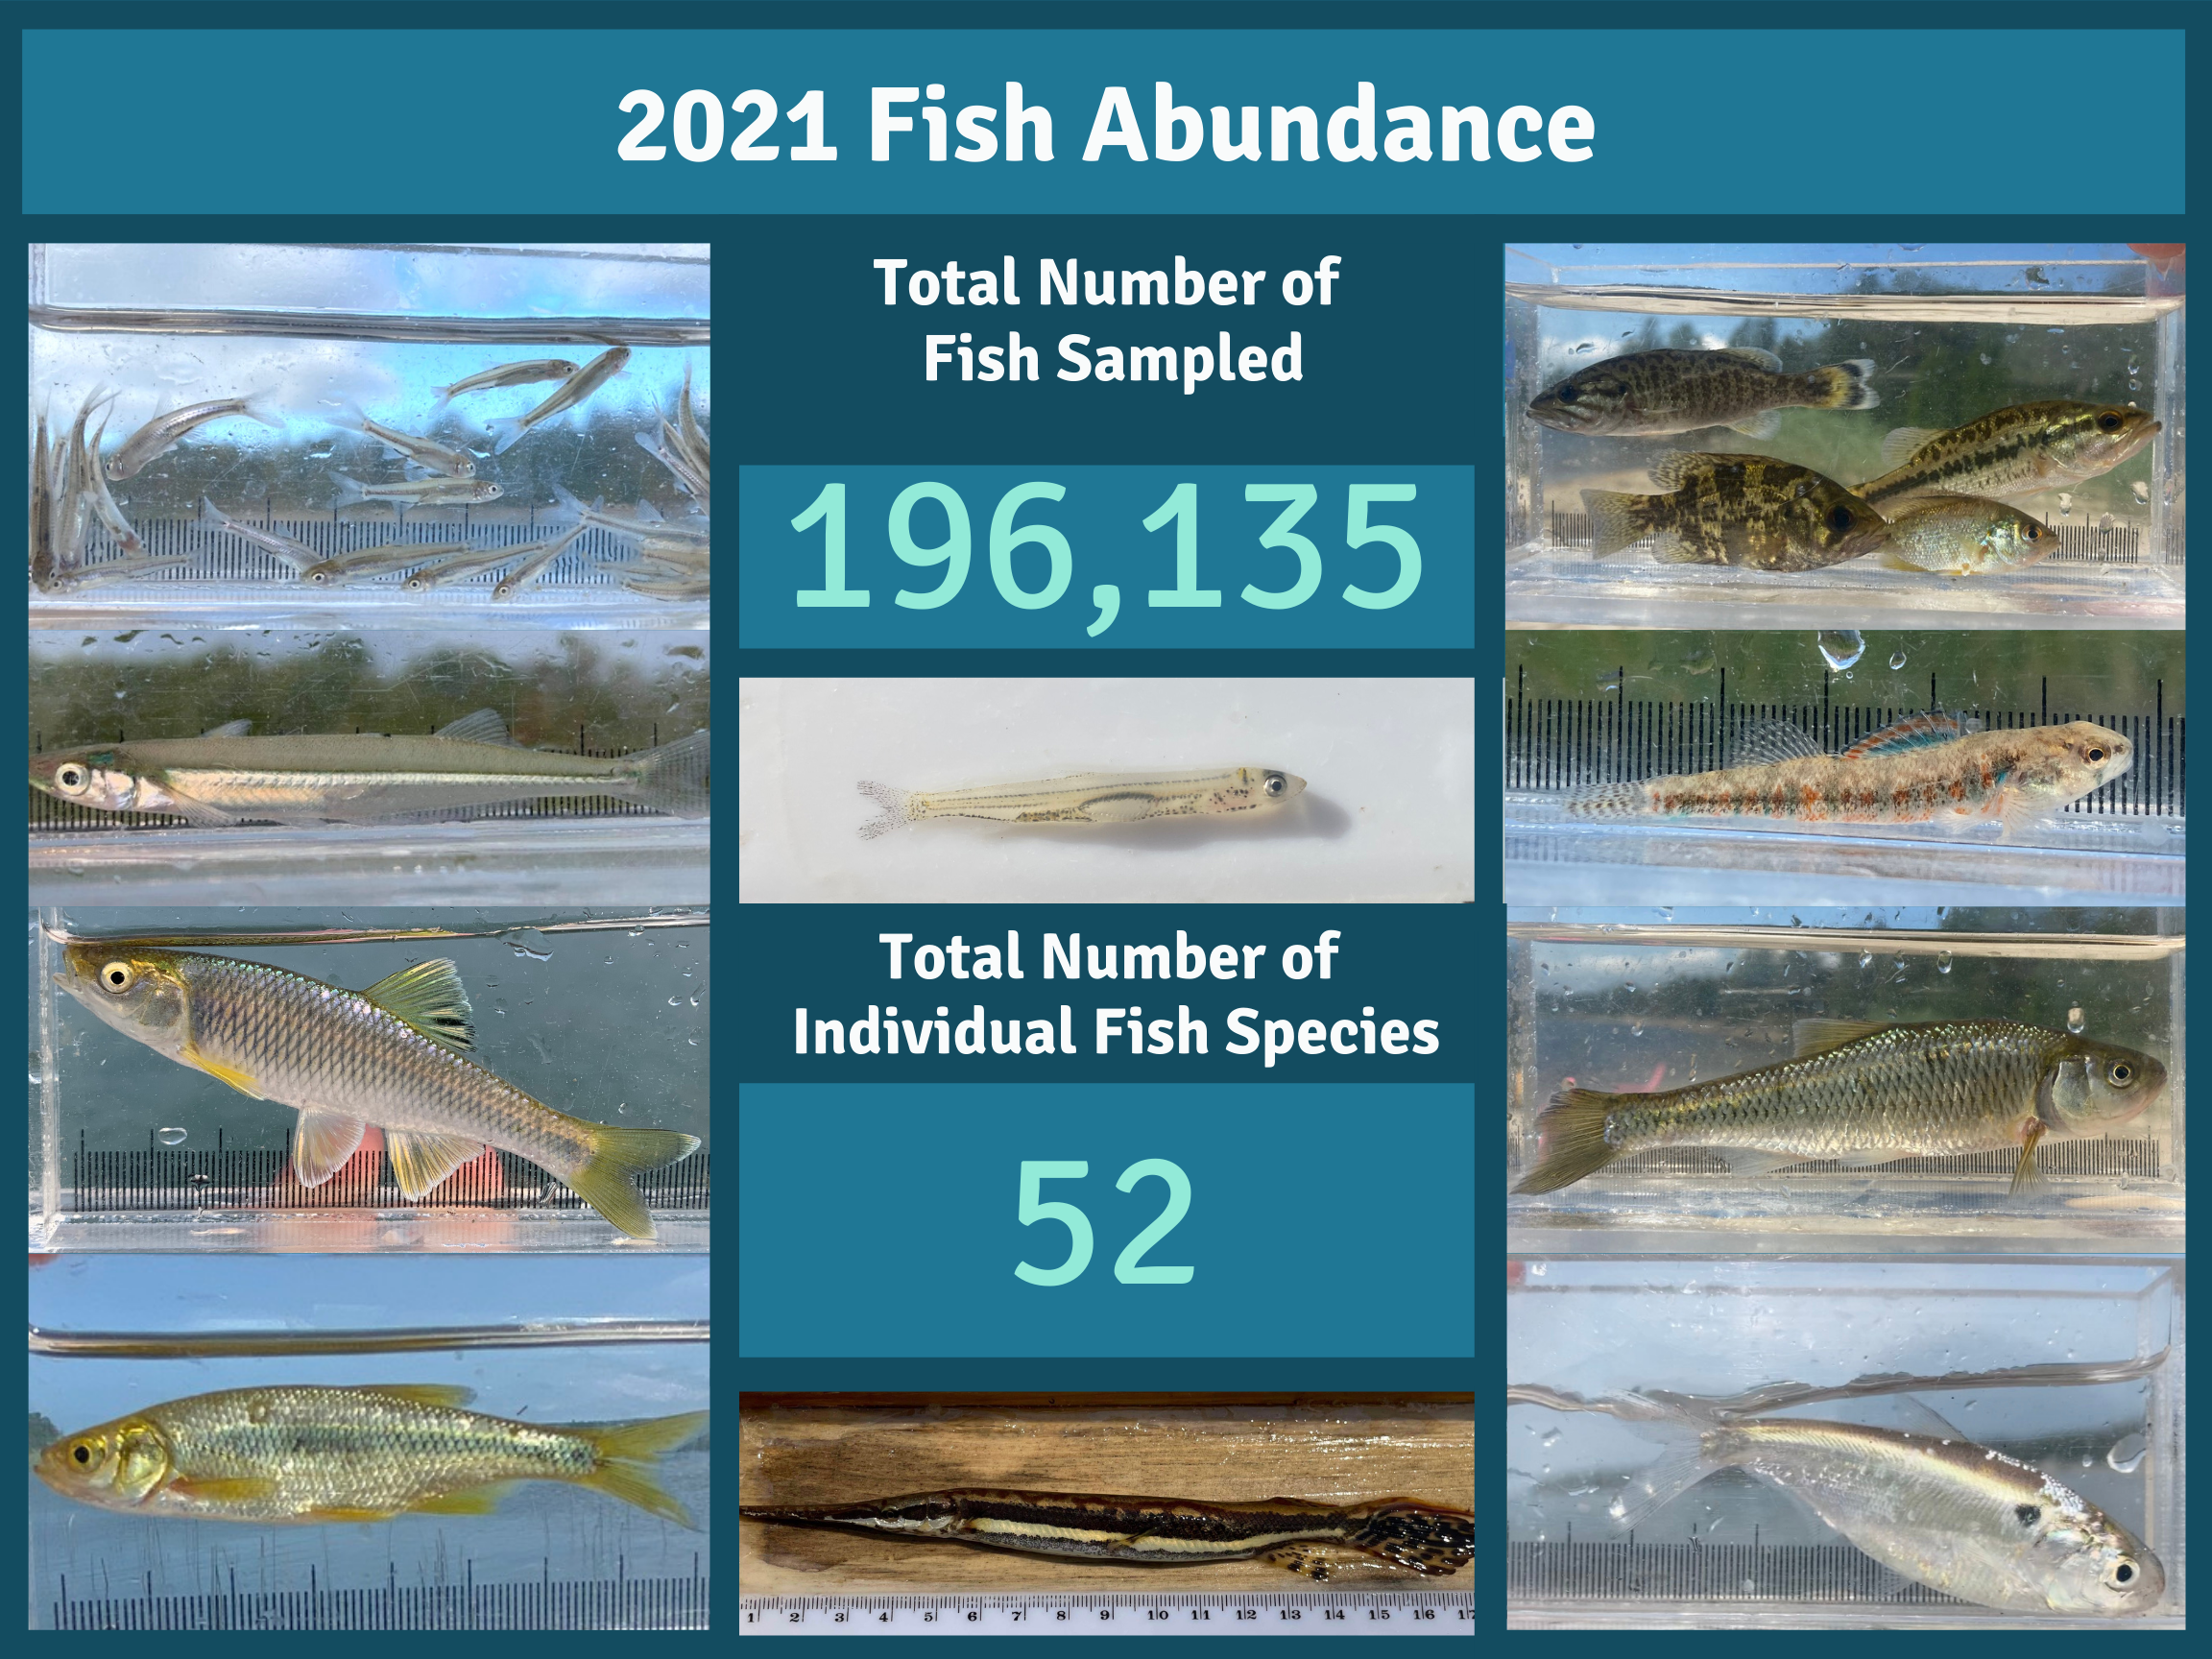 Collage of different fish in measuring instruments (title: 2021 Fish Abundance) Total Number of Fish Sampled: 196,135. Total Number of Individual Species: 52.